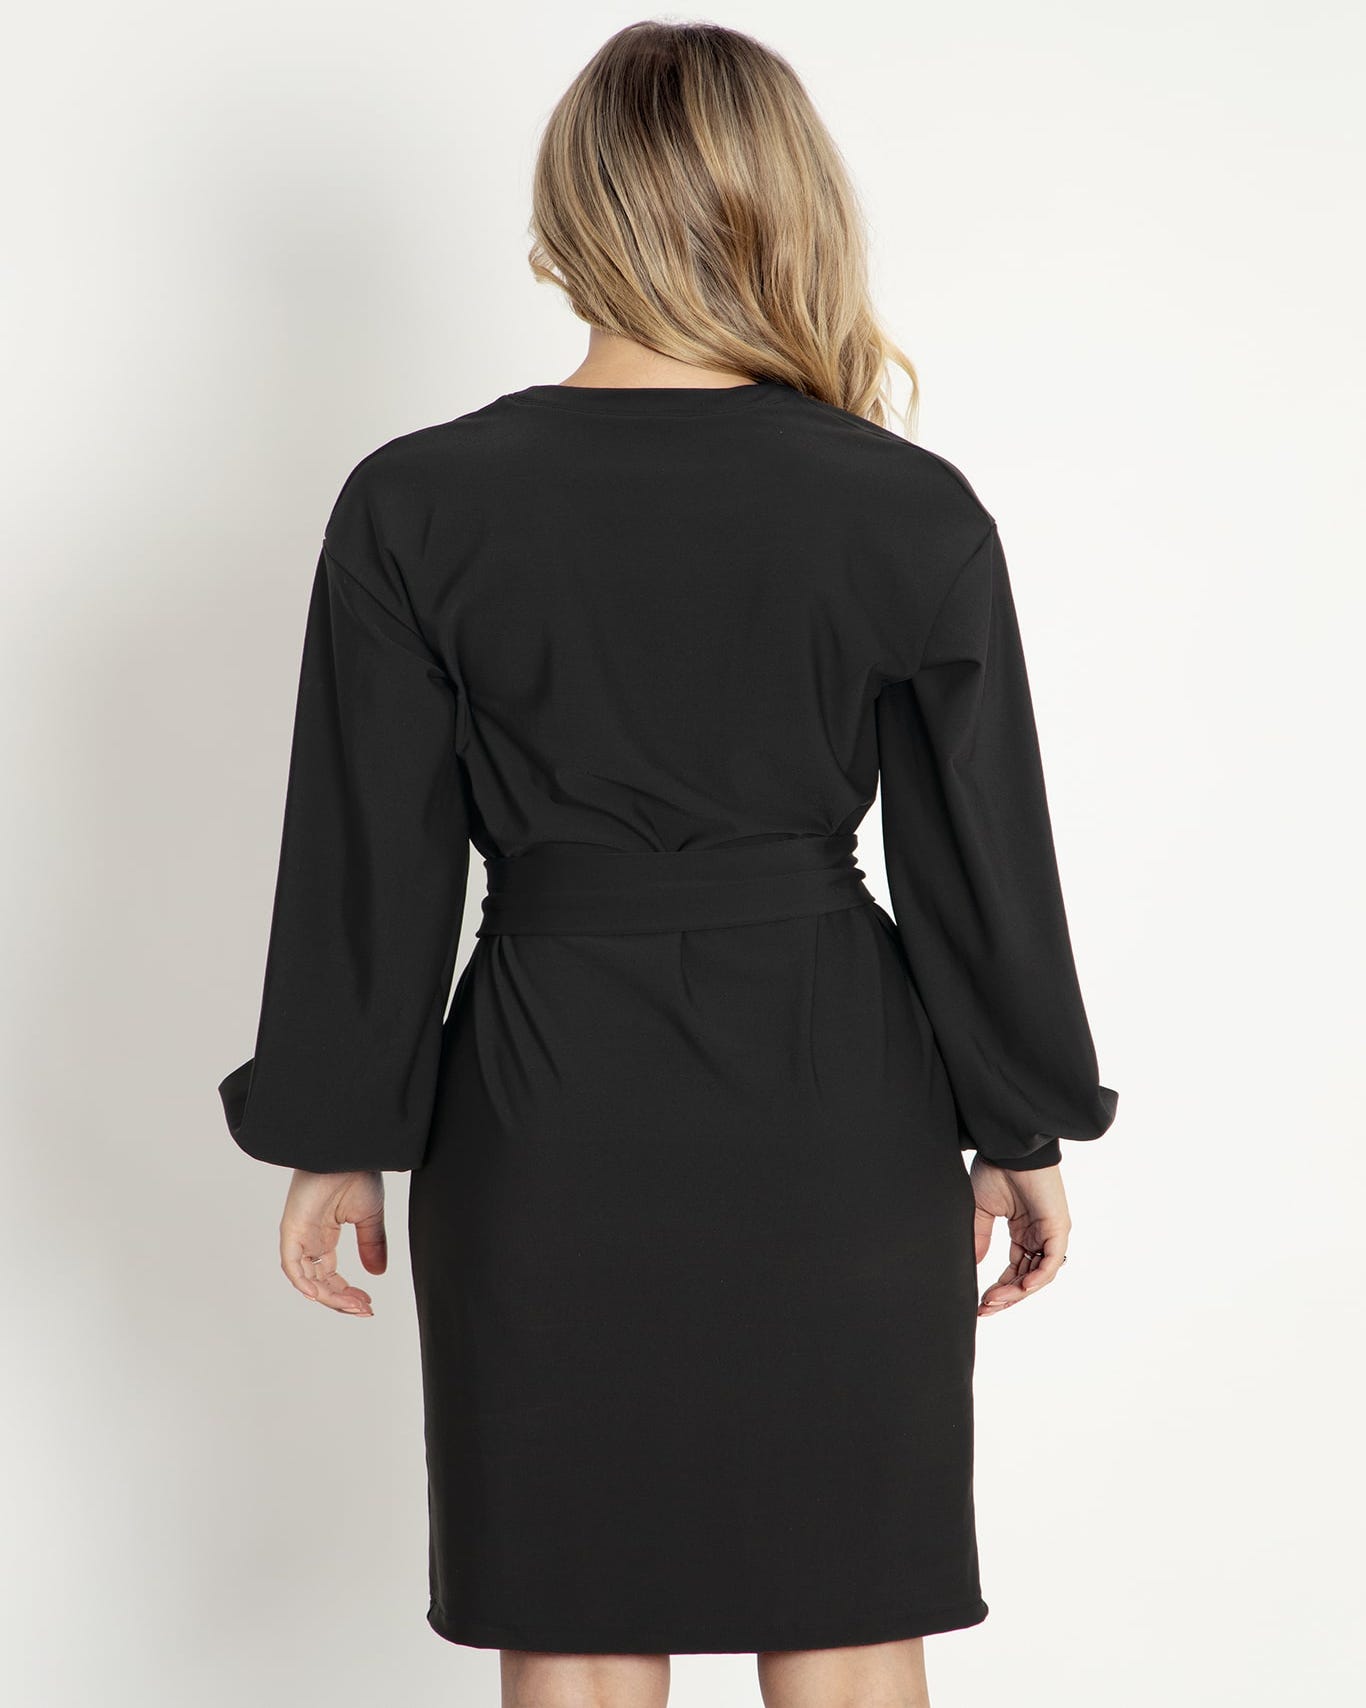 Cosy Black Bishop Sweater Dress - Limited